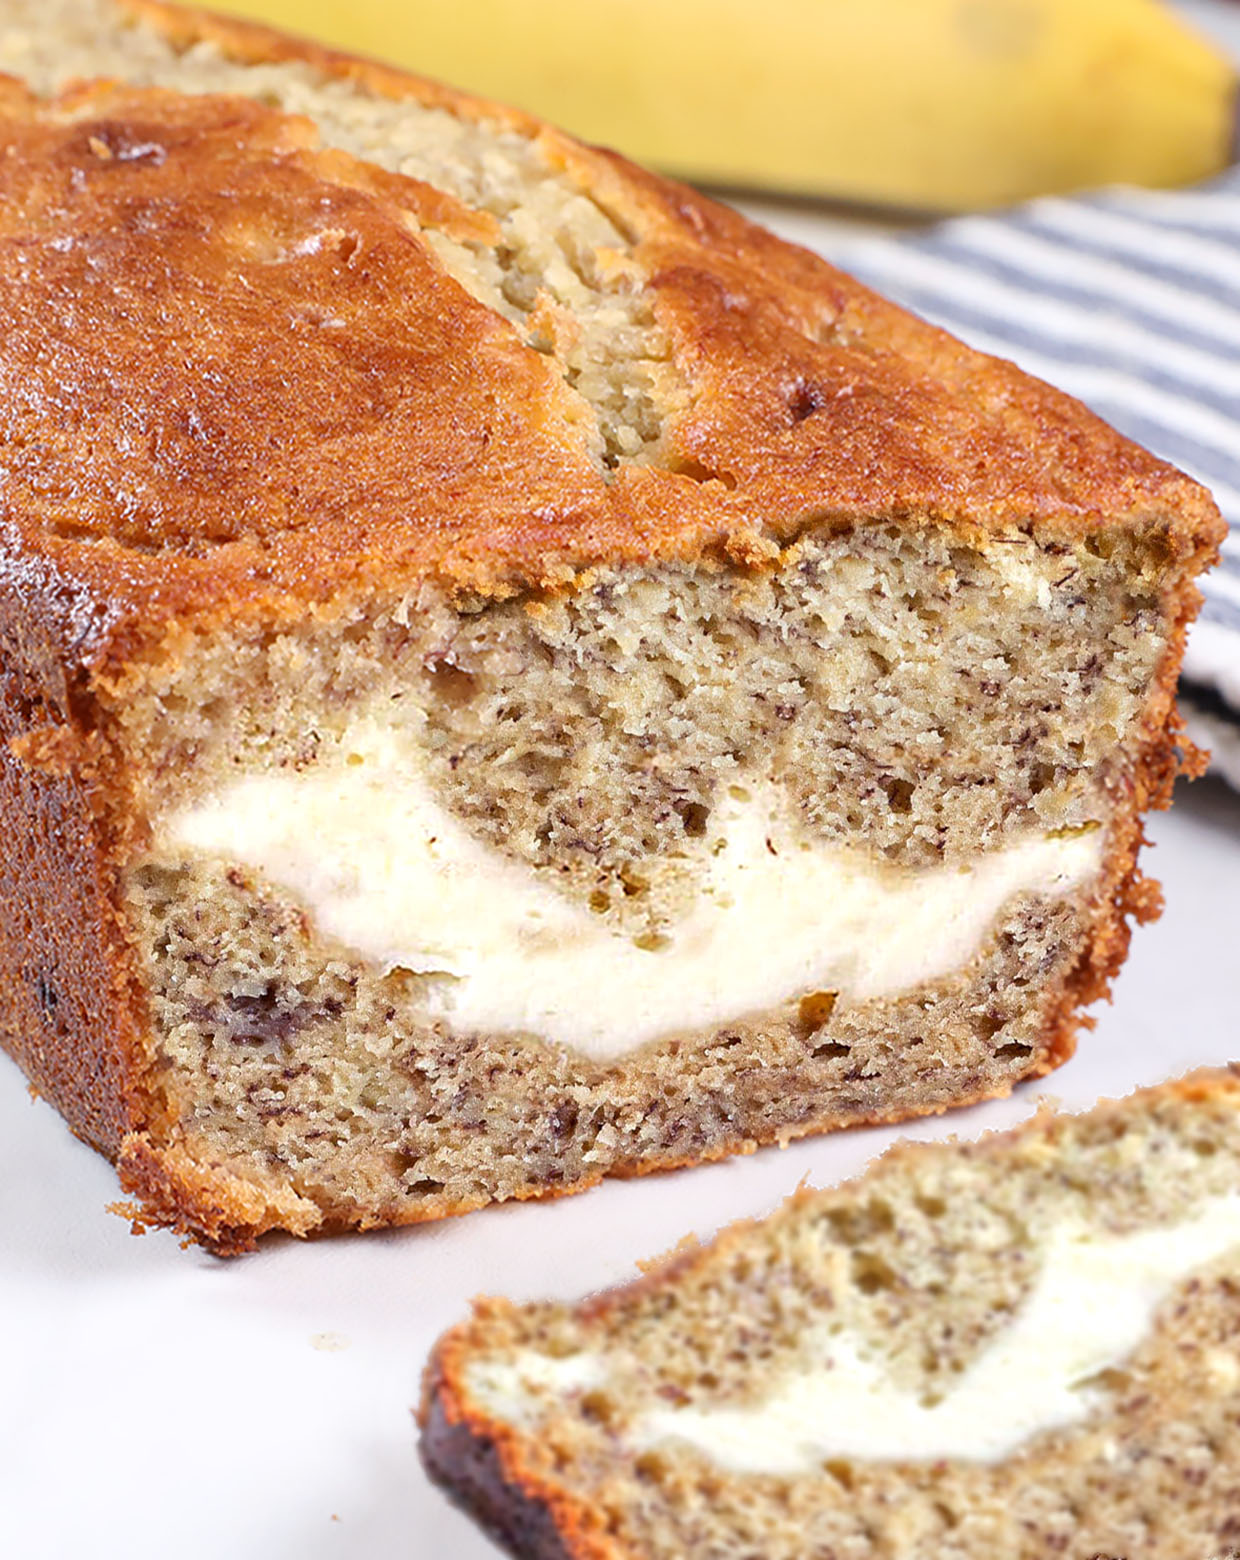 Cream Cheese Banana Bread - light, moist and delicious! This is the BEST homemade banana bread recipe! Perfect for breakfast, snacks, and dessert!